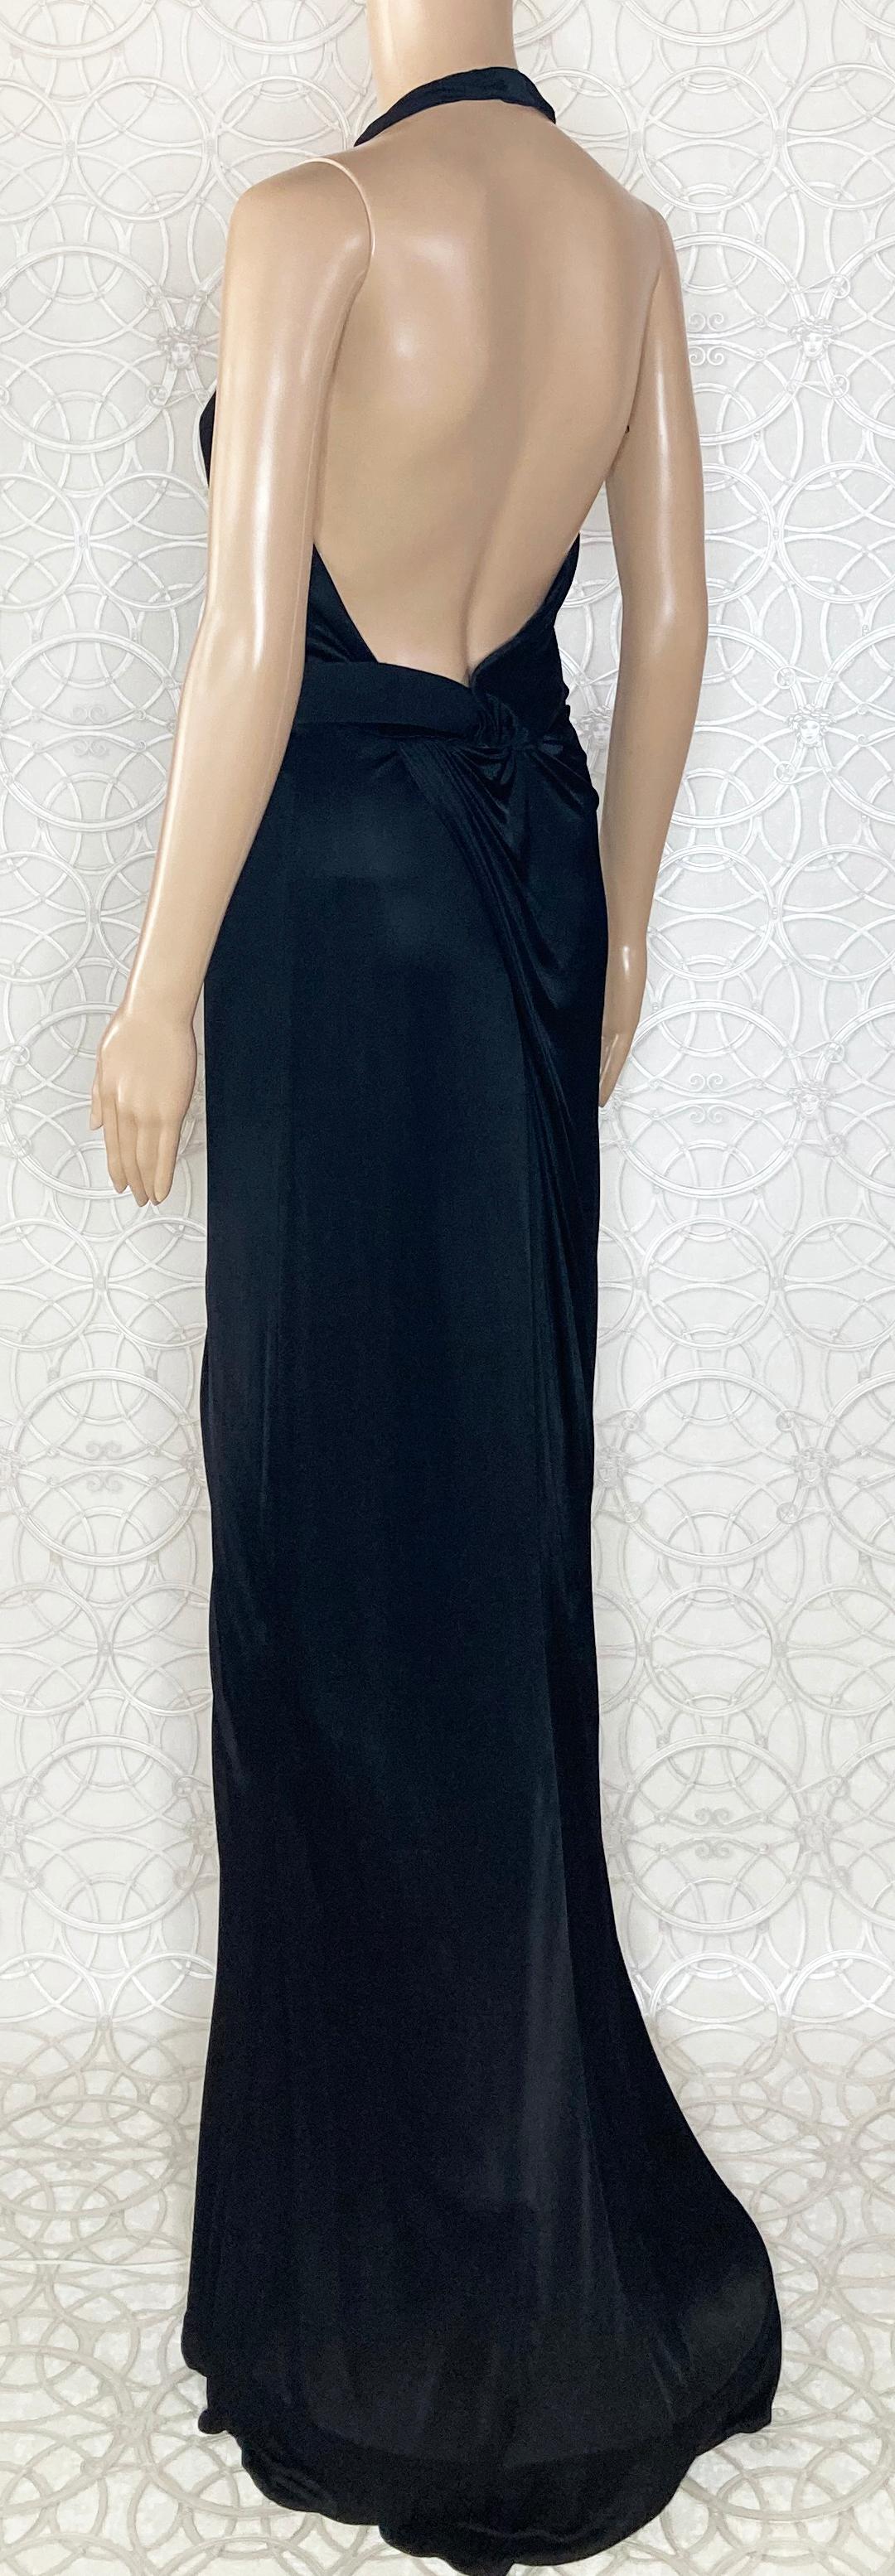 VERSACE BLACK VISCOSE LONG GOWN DRESS with OPEN BACK 42 - 6 For Sale 5